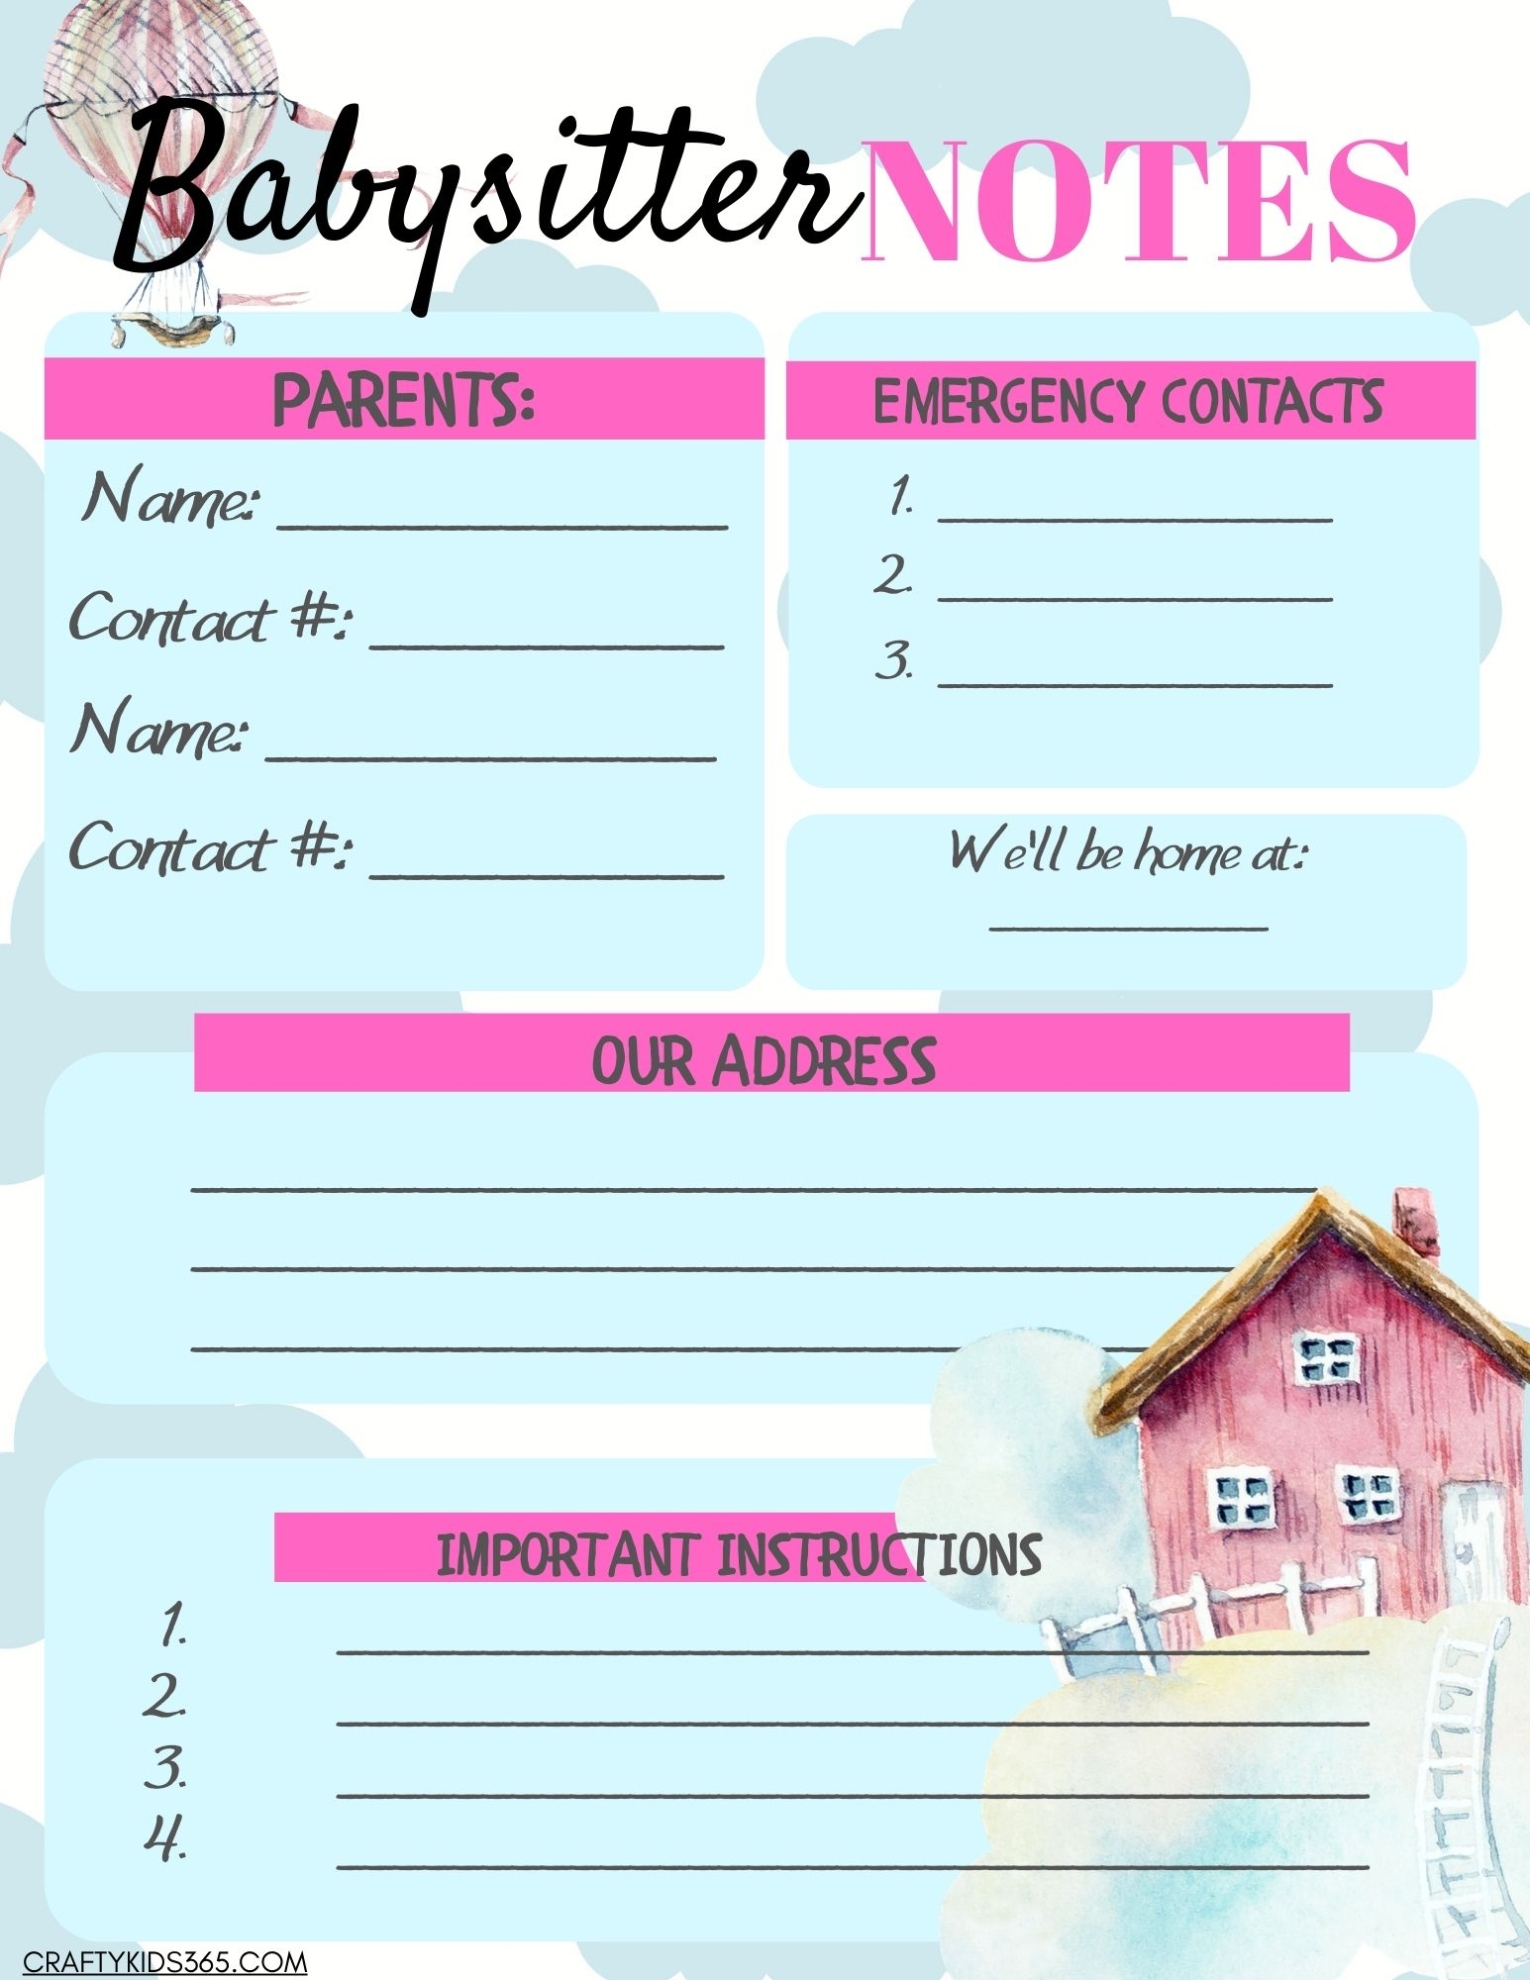 Babysitter Notes Printable Pertaining To Nanny Notes Template